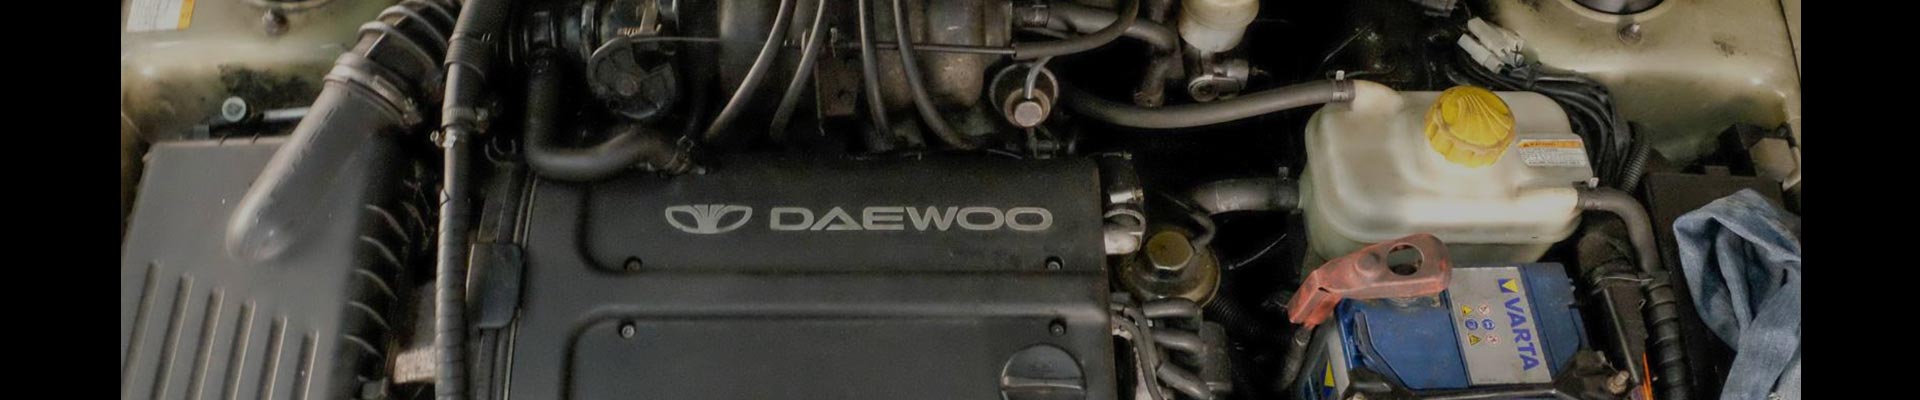 Shop Replacement 1999 Daewoo Nubira Parts with Discounted Price on the Net